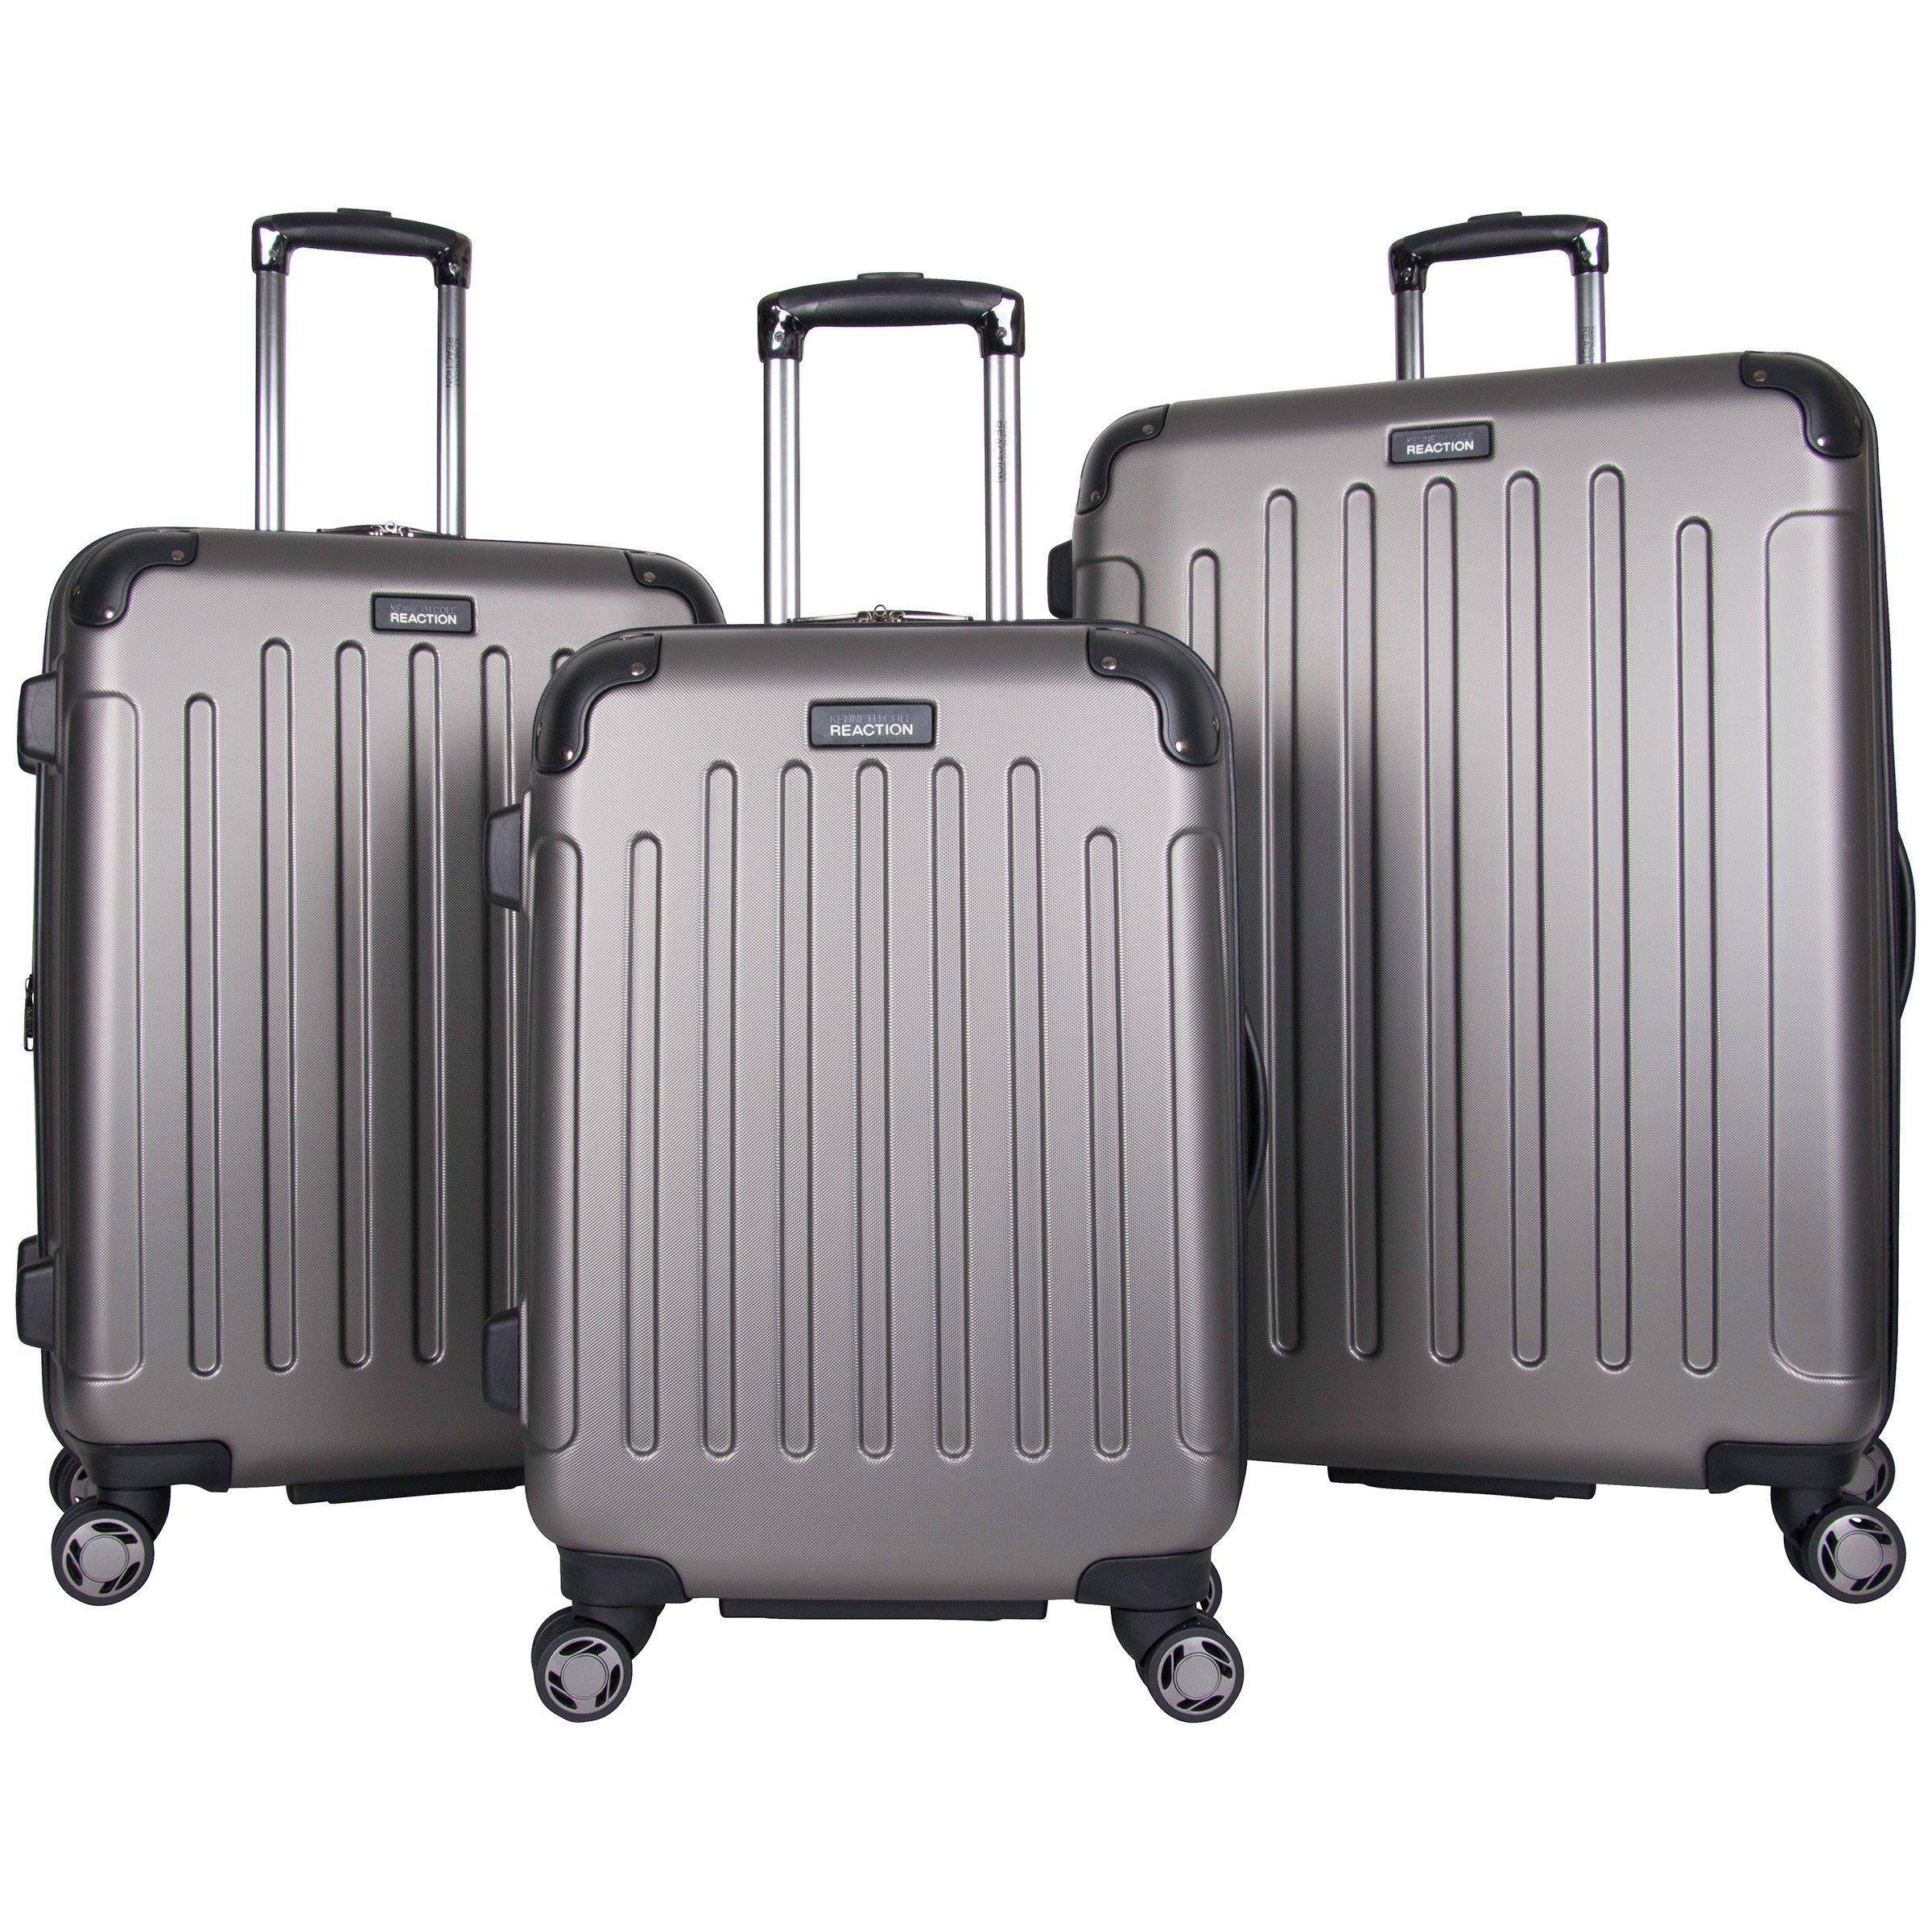 Kenneth Cole Reaction Renegade Luggage Expandable 8-wheel Spinner ...